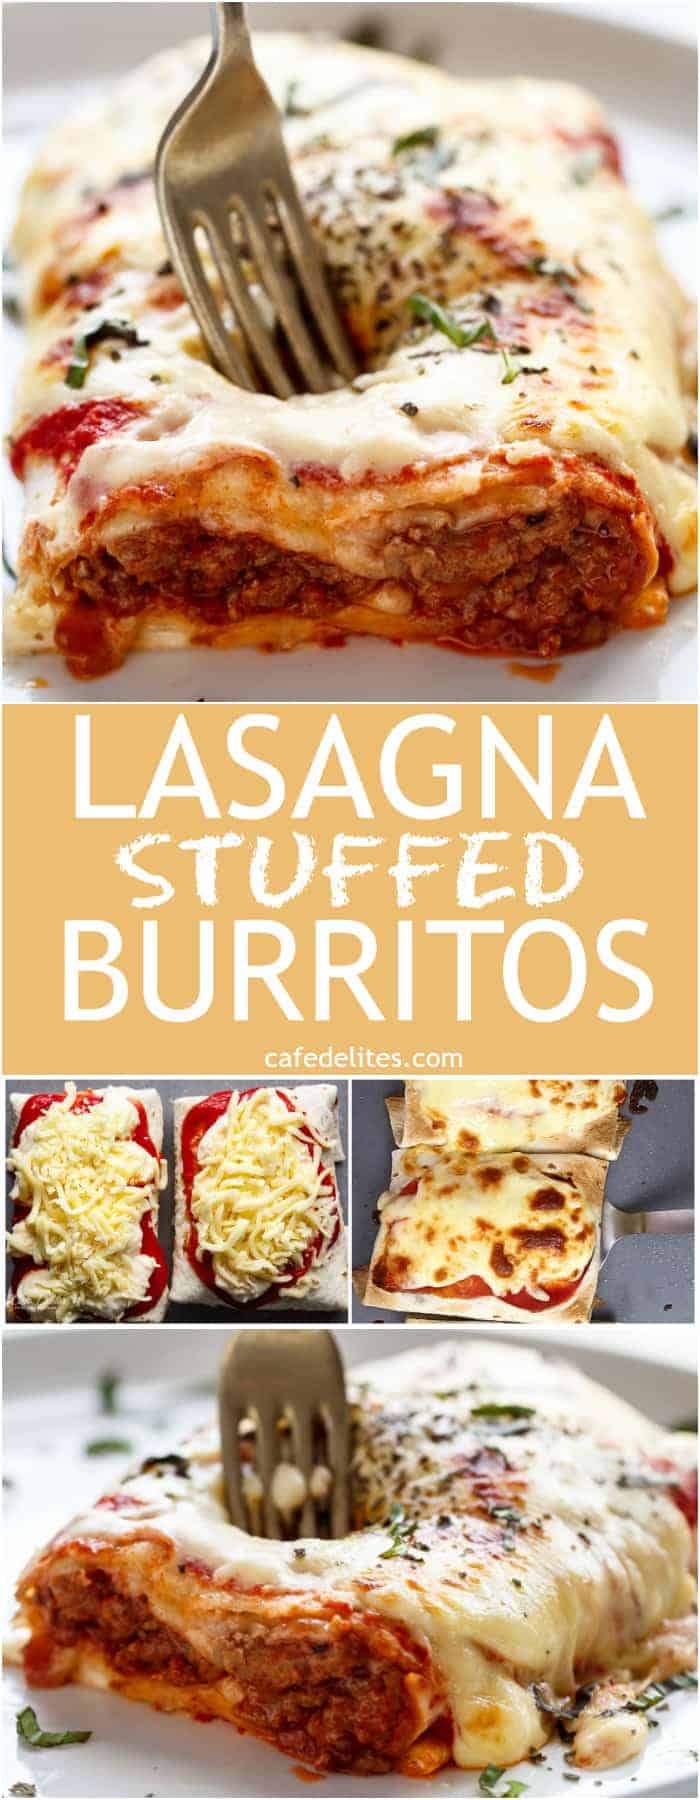 These Easy Lasagna Stuffed Burritos are a family favourite! Stuffed with lasagna meat sauce, lasagna flavours, and plenty of melted mozzarella cheese! | https://cafedelites.com